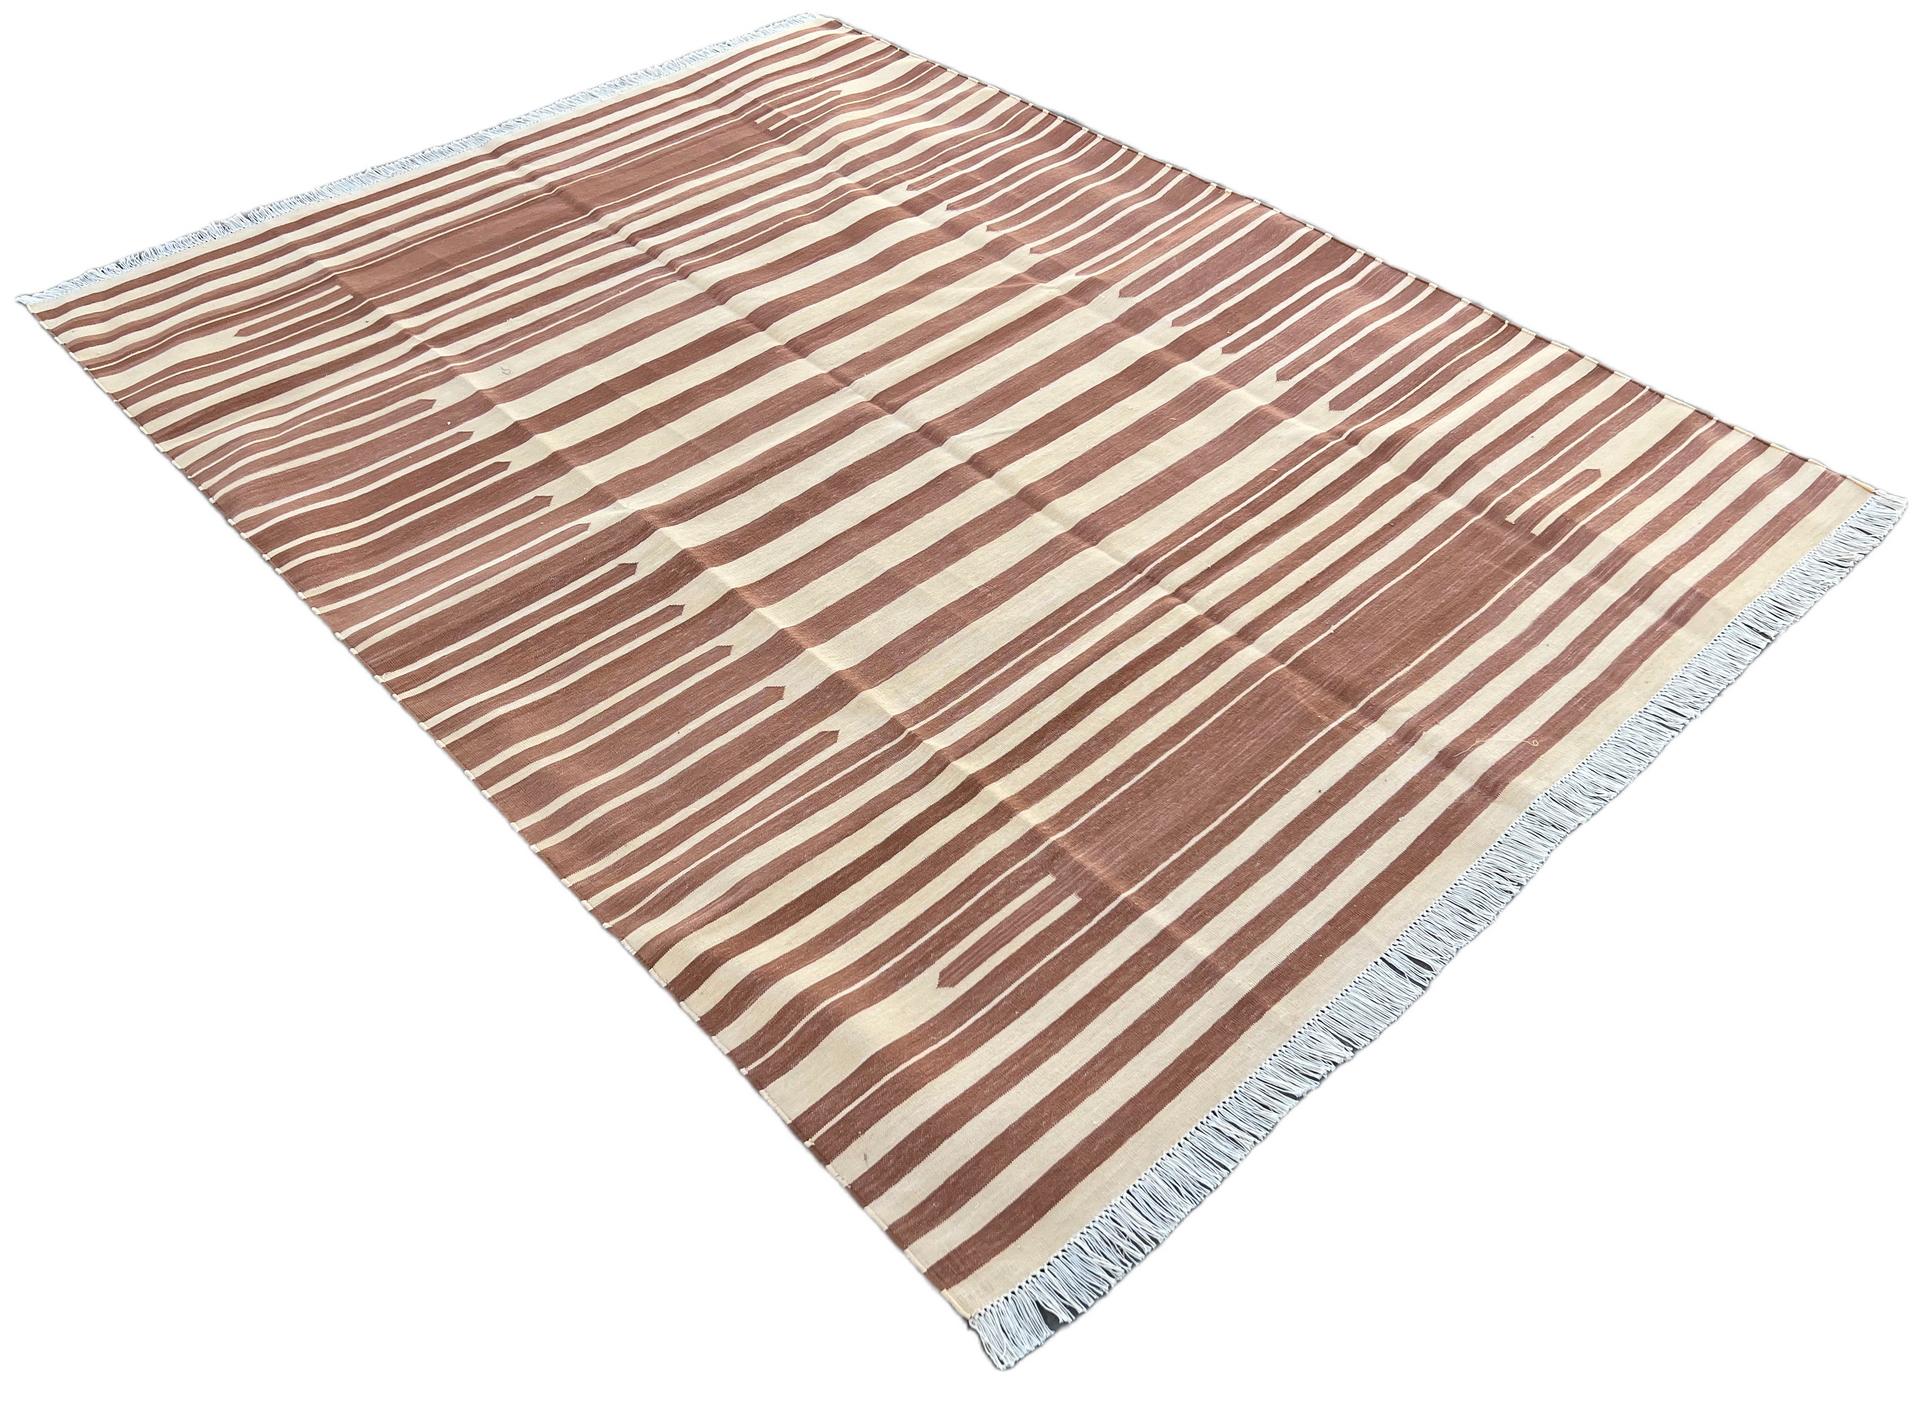 Cotton Vegetable Dyed Tan And Cream Striped Indian Dhurrie Rug-5'x7' 
These special flat-weave dhurries are hand-woven with 15 ply 100% cotton yarn. Due to the special manufacturing techniques used to create our rugs, the size and color of each